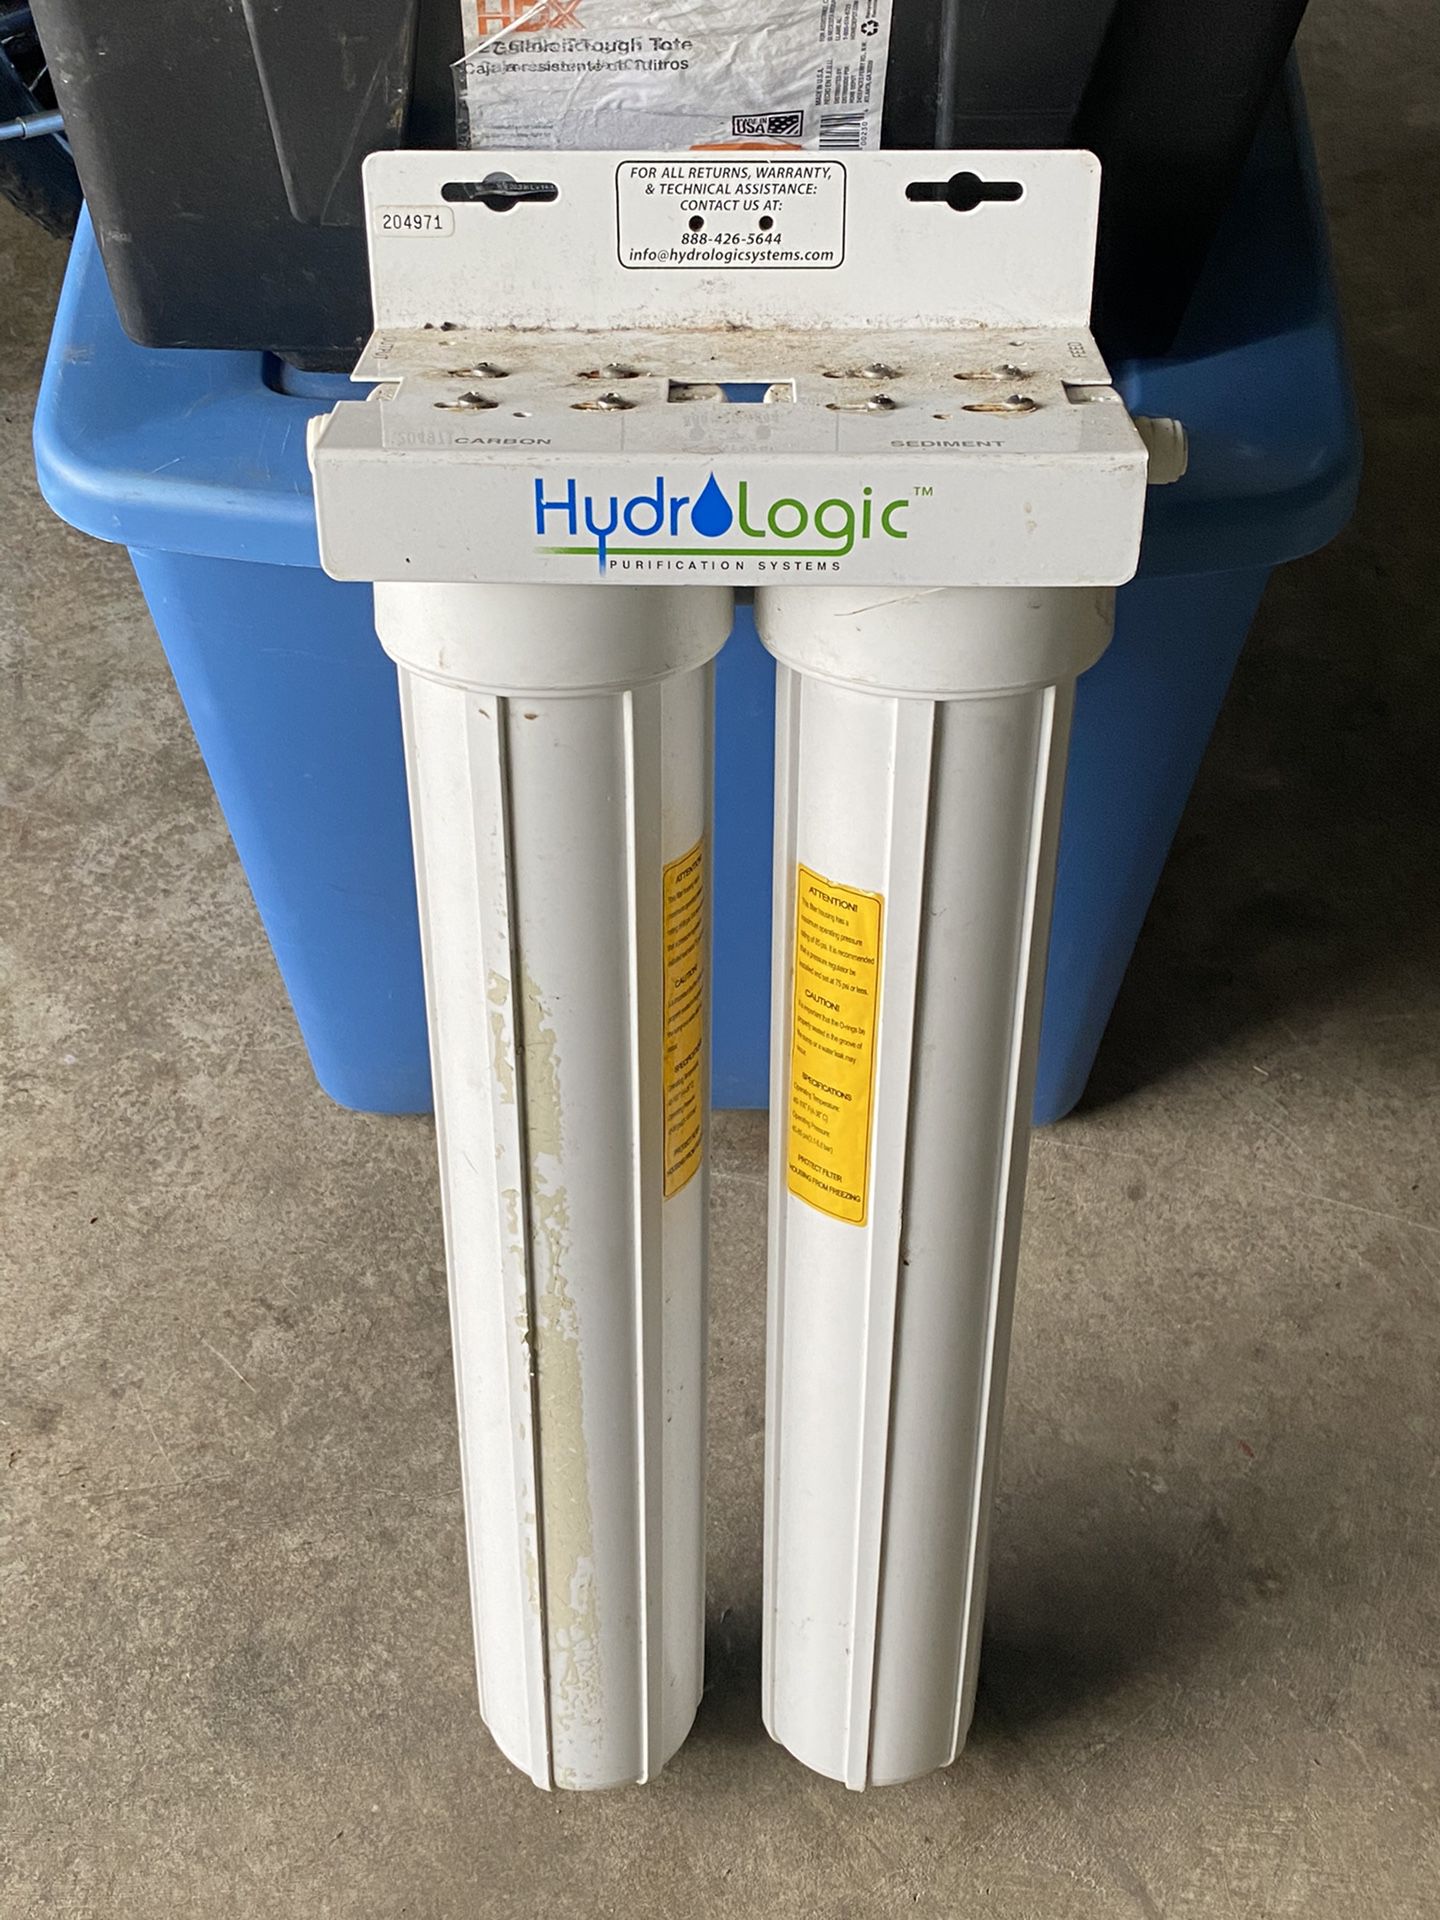 Hydrologic water filters the big boy and regular size.